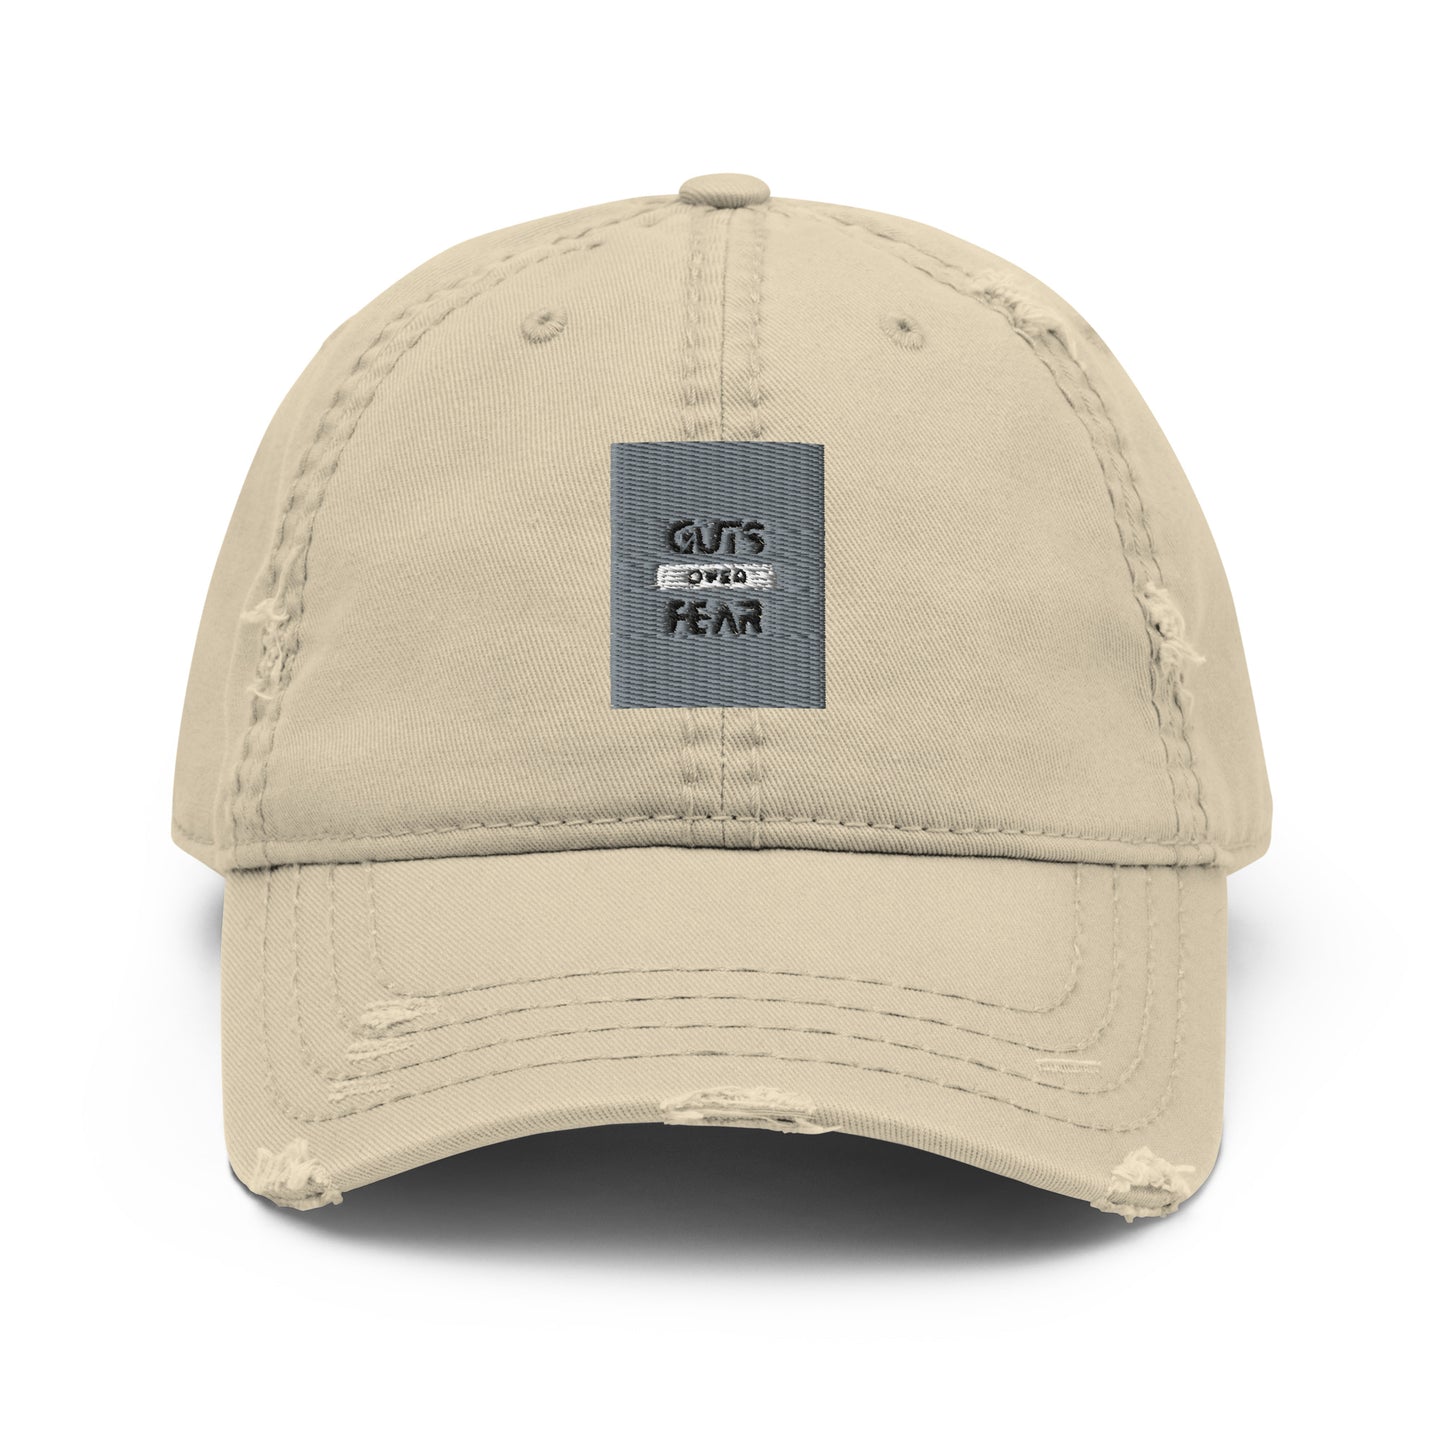 Image of a stone coloured dad hat with the logo 'Guts Over Fear' embroidered in black thread on the front. The hat has a curved brim and an adjustable strap at the back for a comfortable fit."